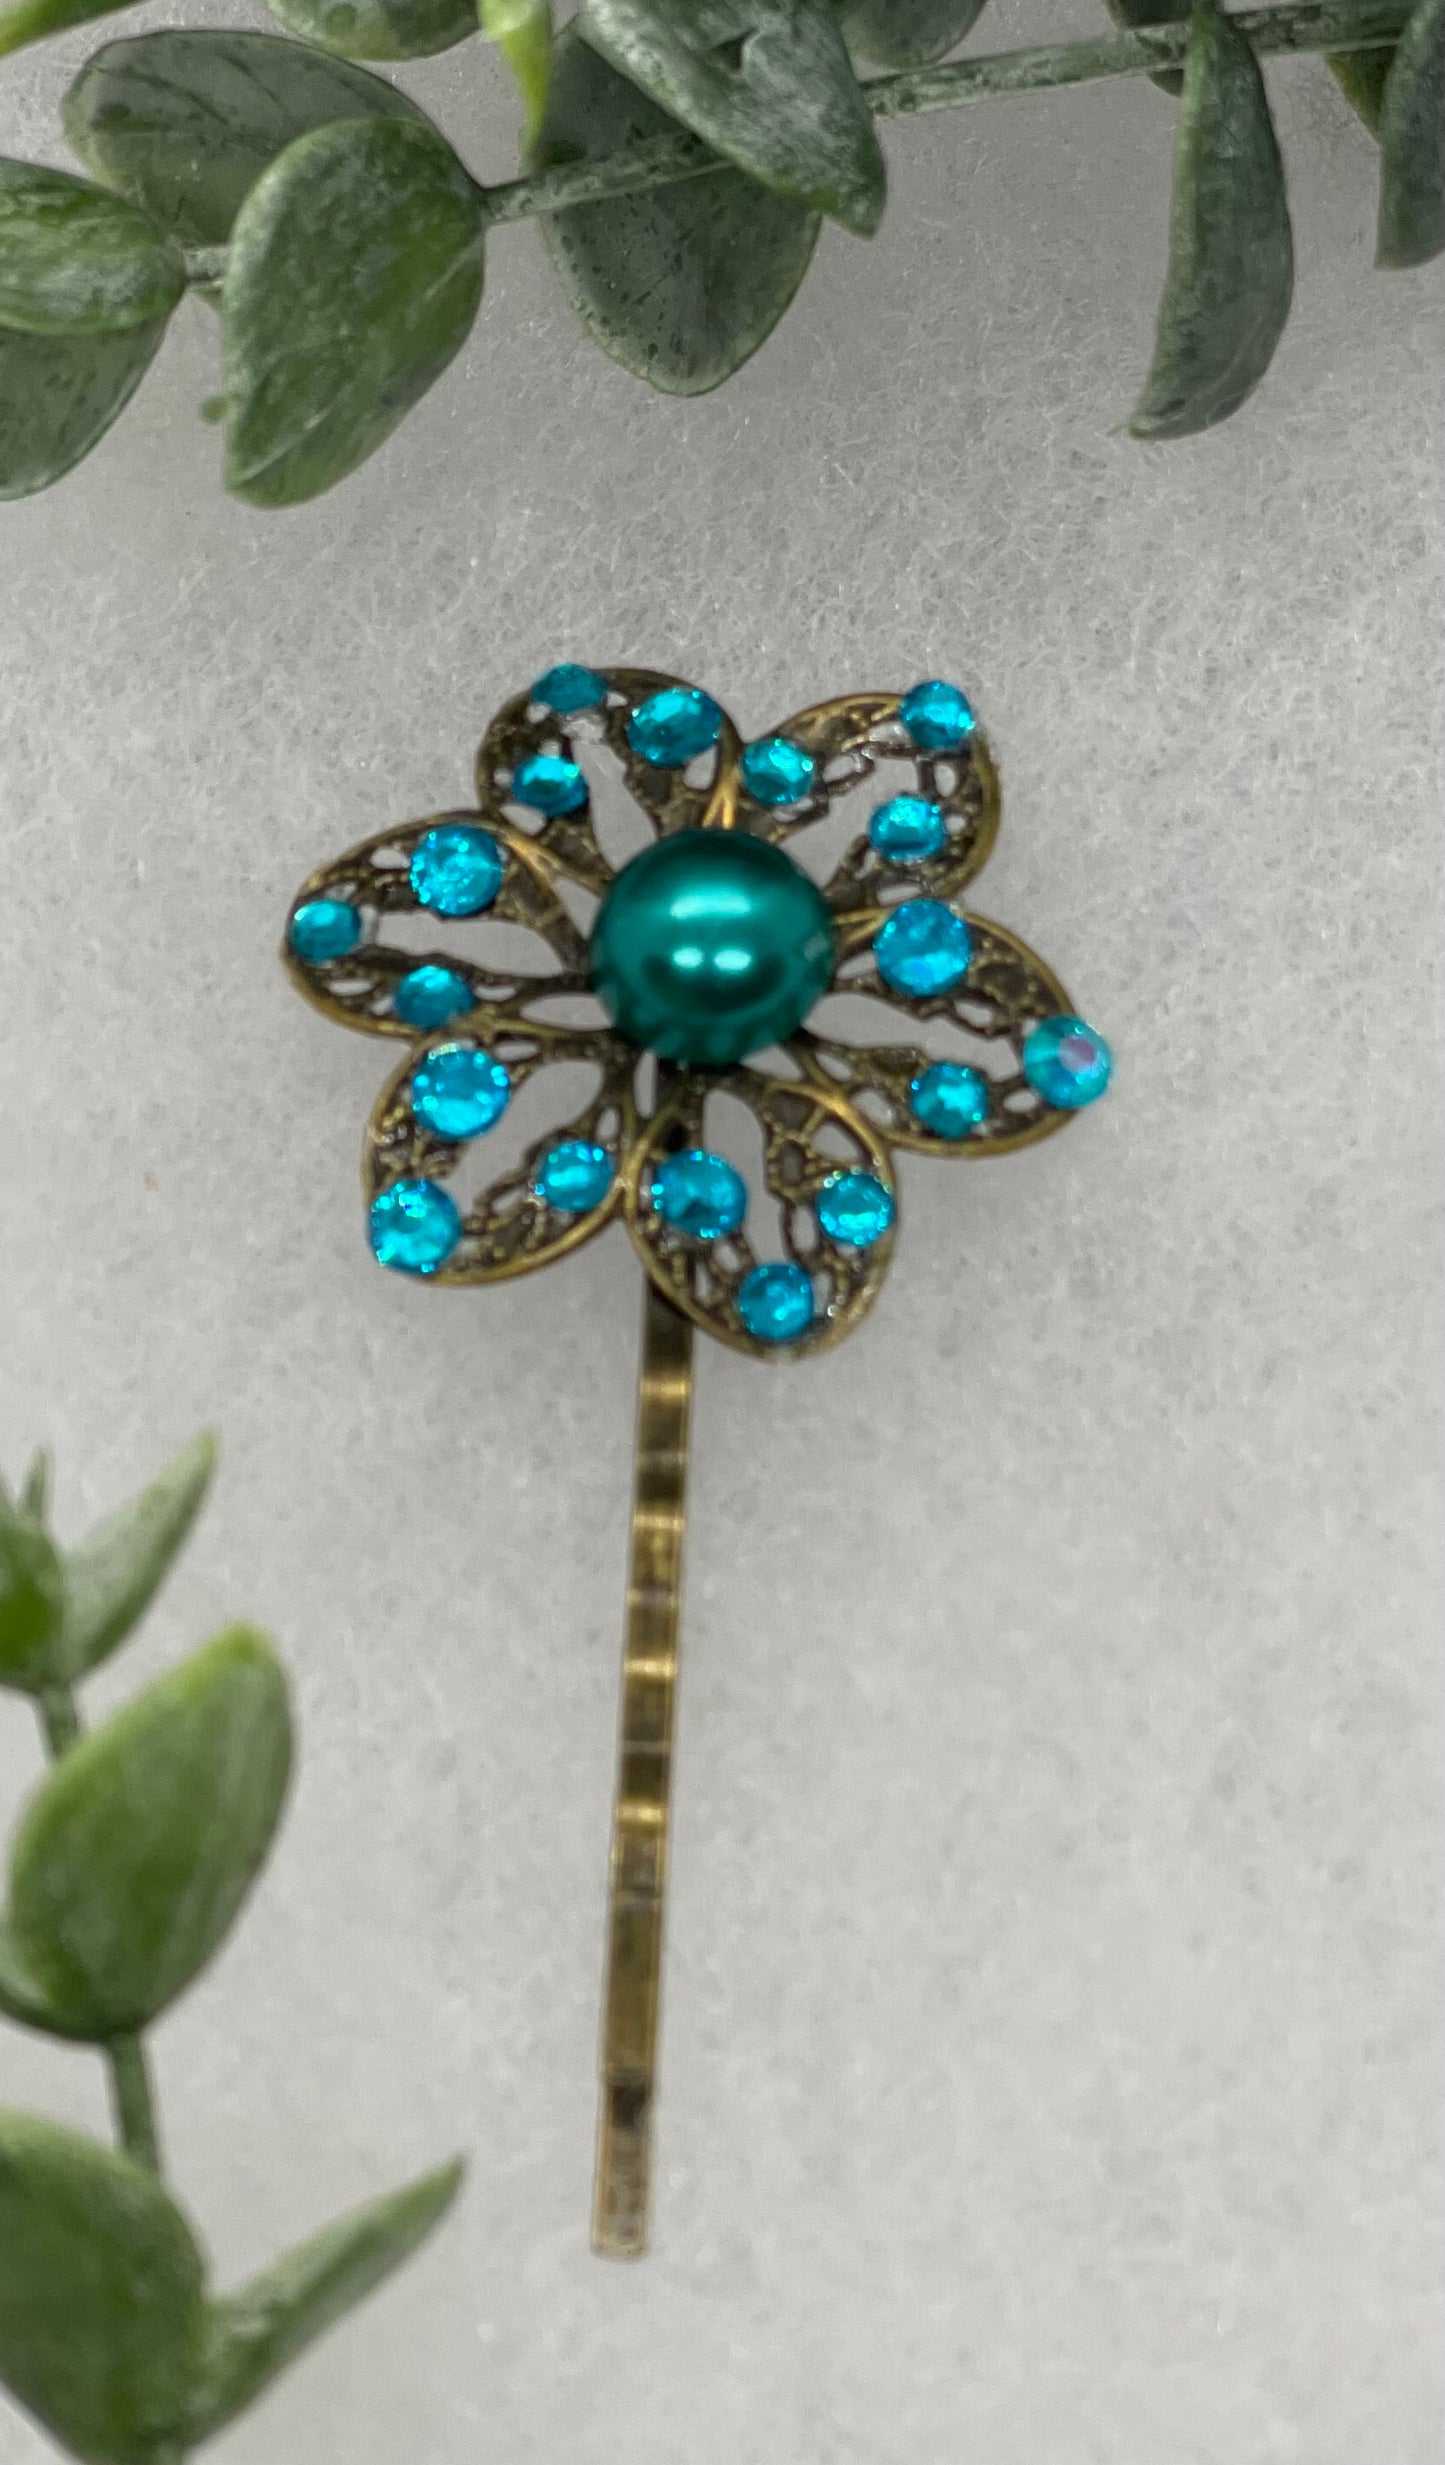 Teal Pearl Antique vintage Style 3.0” flower hair pin wedding engagement bride princess formal hair accessory accessories